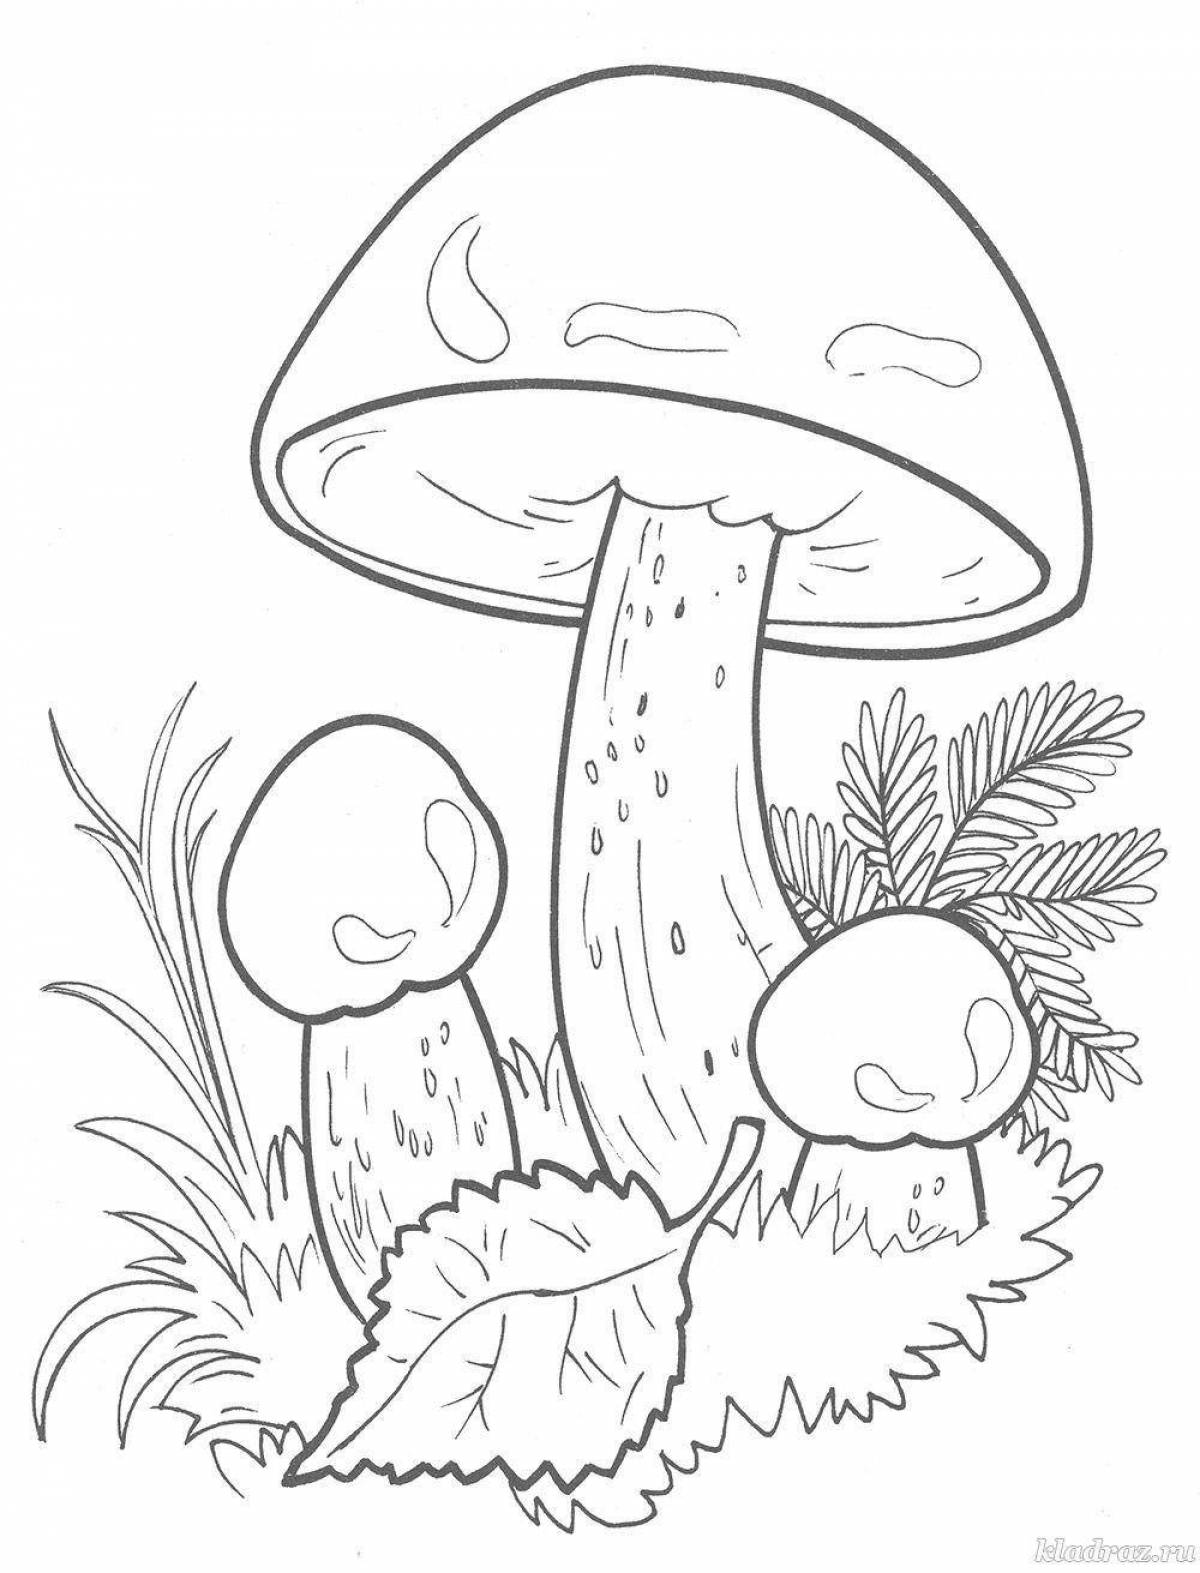 Merry mushroom coloring book for 4-5 year olds